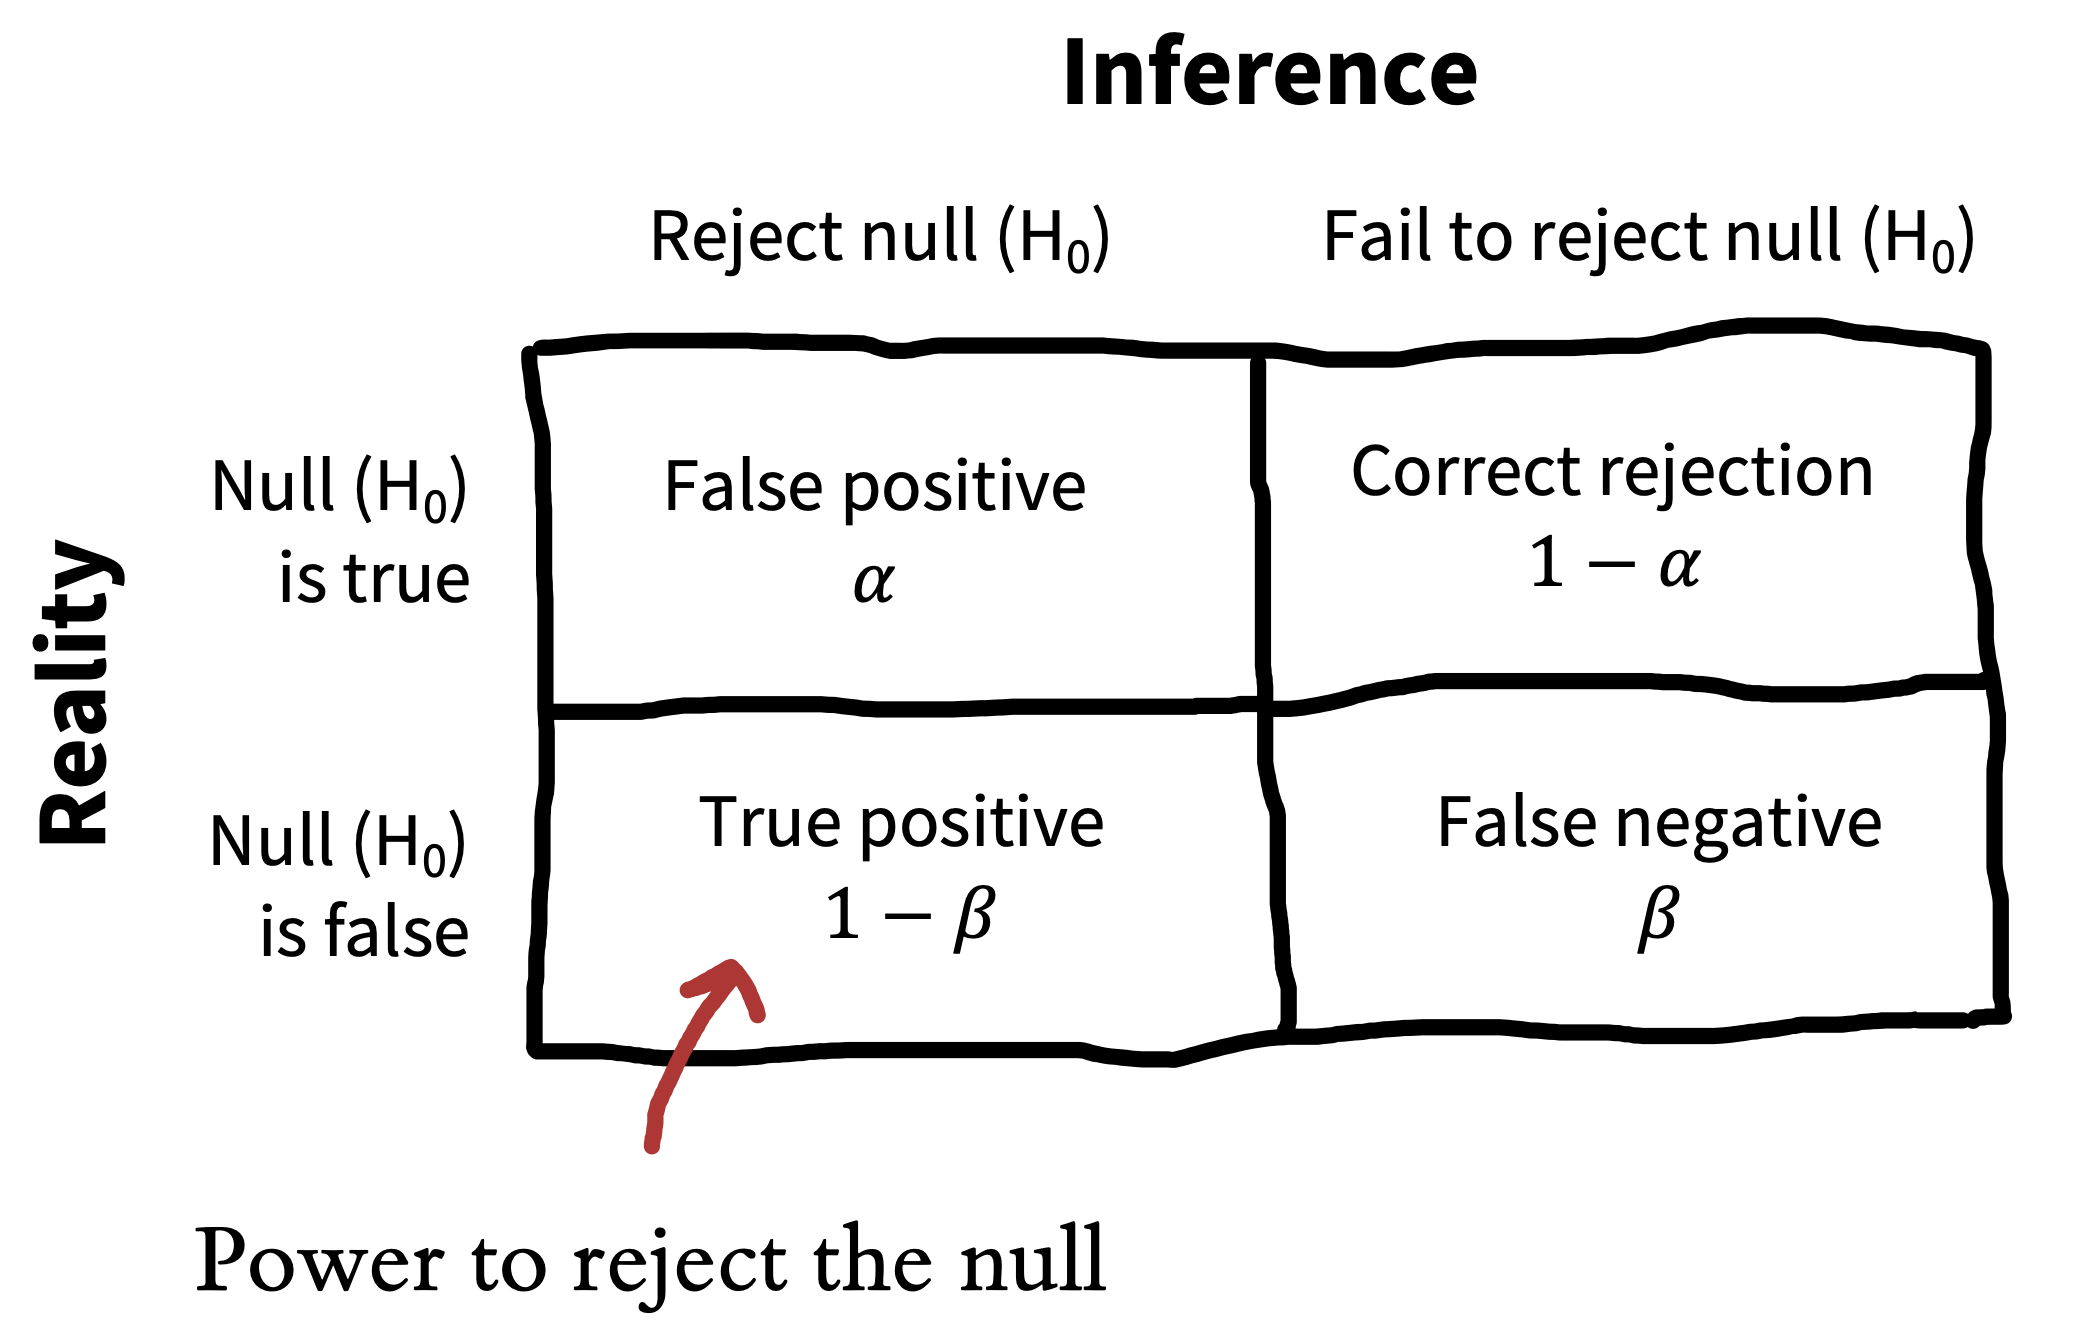 Standard decision matrix for NHST. The lower-left hand quadrant shows power to reject the null.